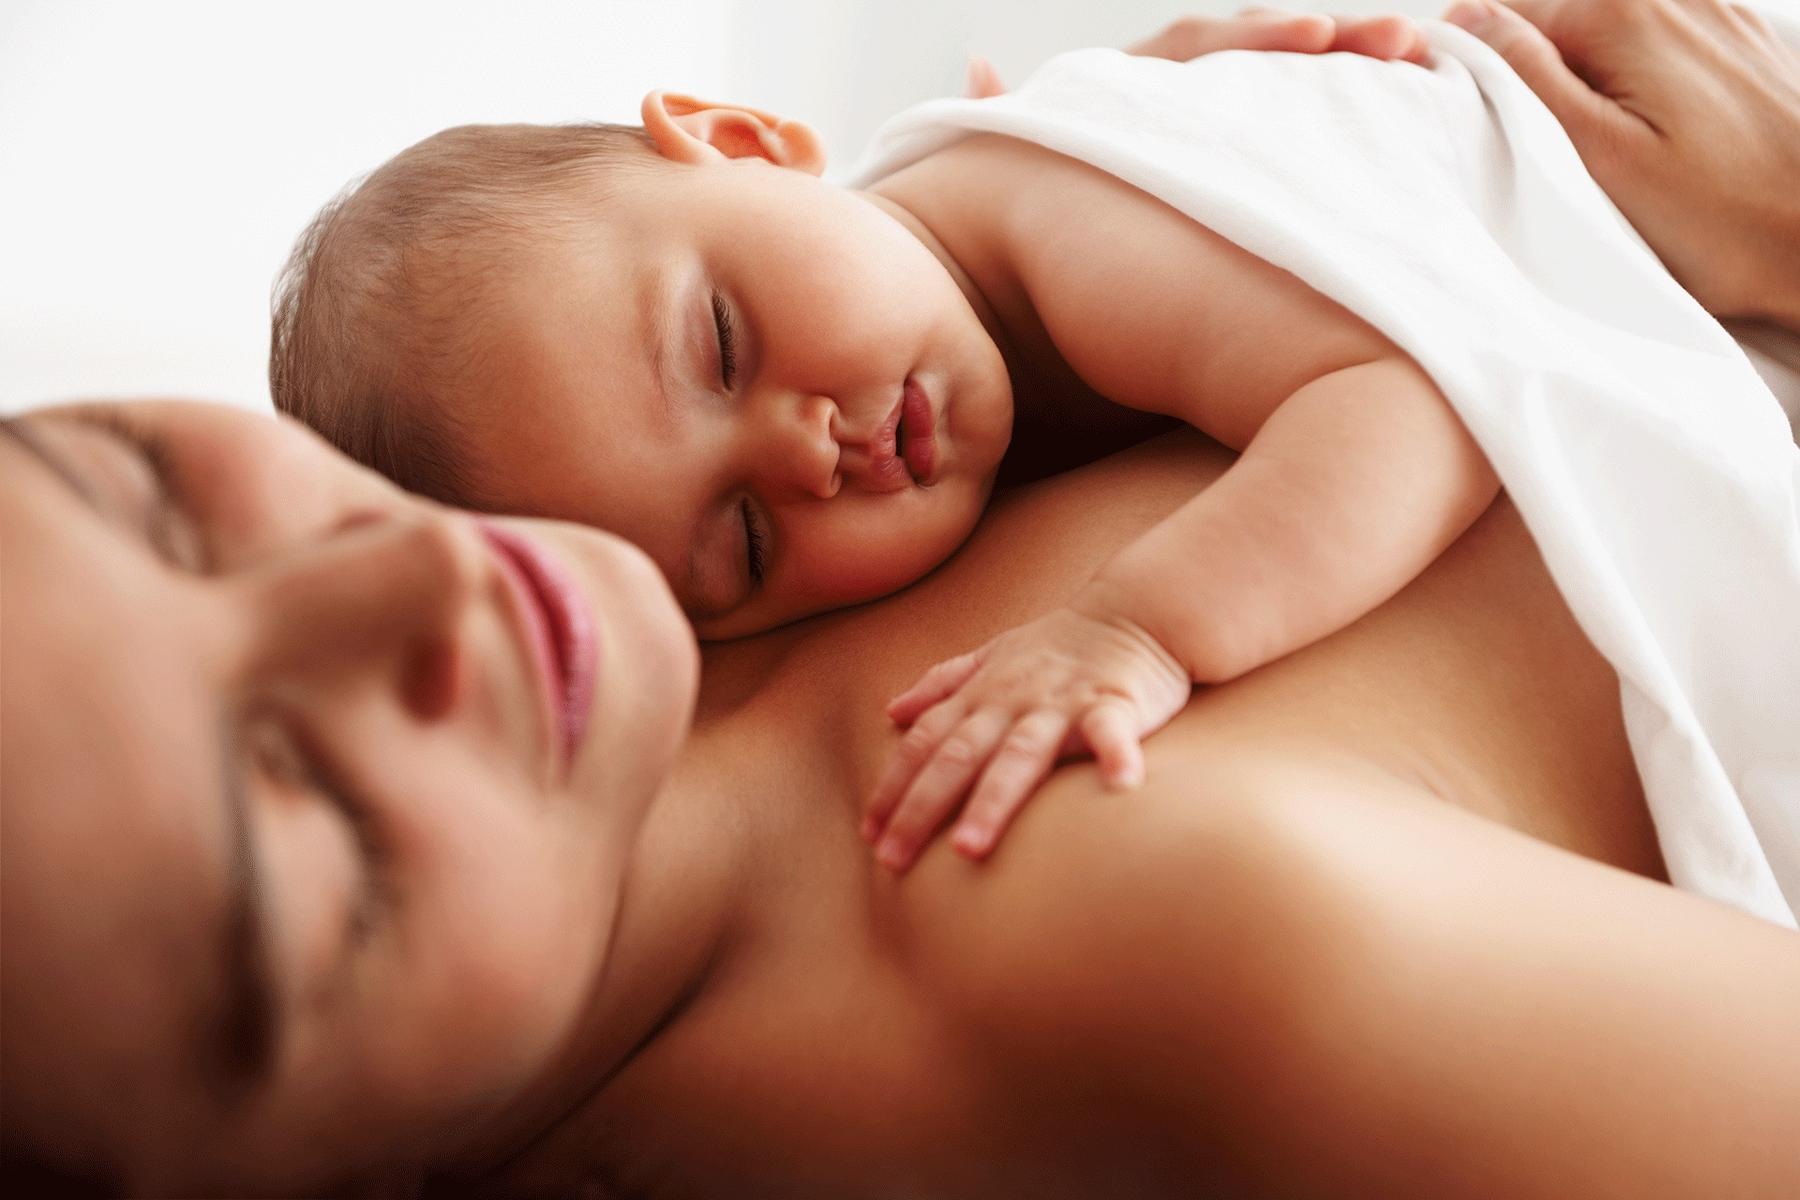 Skin-to-skin 'kangaroo care' shows important benefits for premature babies  - Women Fitness